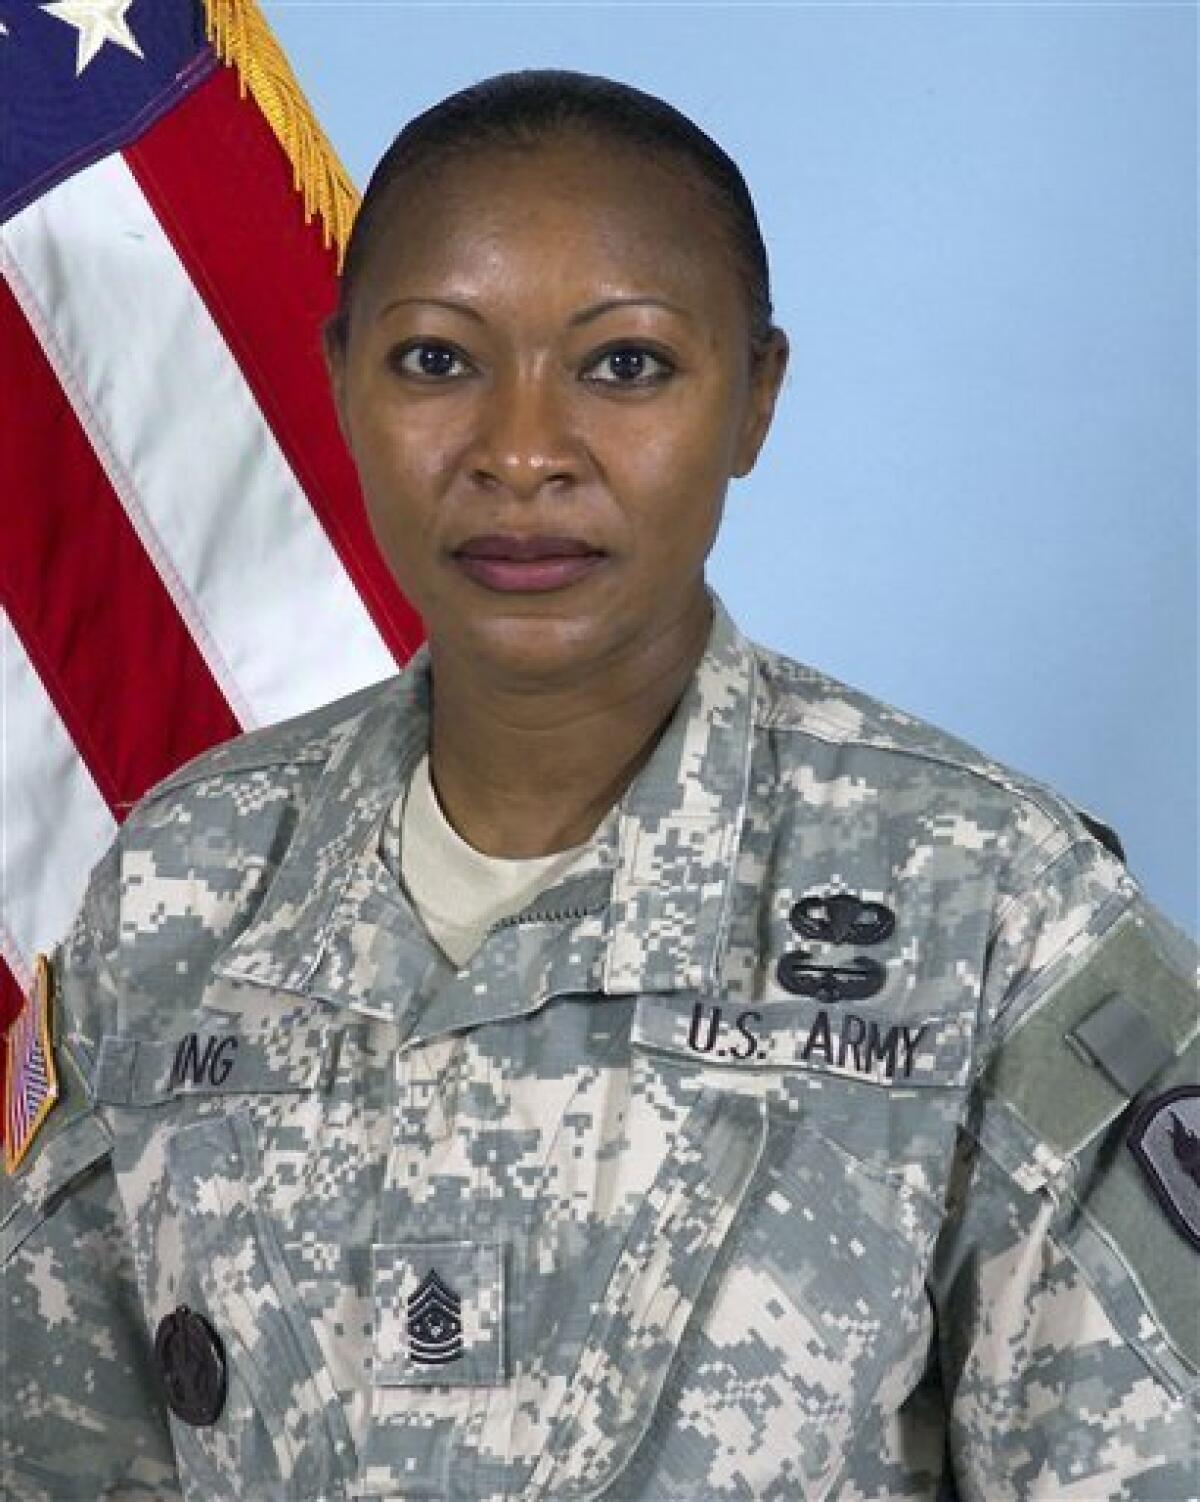 FILE - This is an undated file photo provided by the U.S. Army of Command Sgt. Maj. Teresa King, commandant-select of the U.S. Army Drill Sergeant School at at Fort Jackson, near Columbia, S.C. The Army has suspended Sgt. Maj. Teresa King, the first woman to lead its drill sergeant school, while it investigates an undisclosed personnel matter, the service said Thursday, Dec. 15, 2011. (AP Photo/U.S. Army)